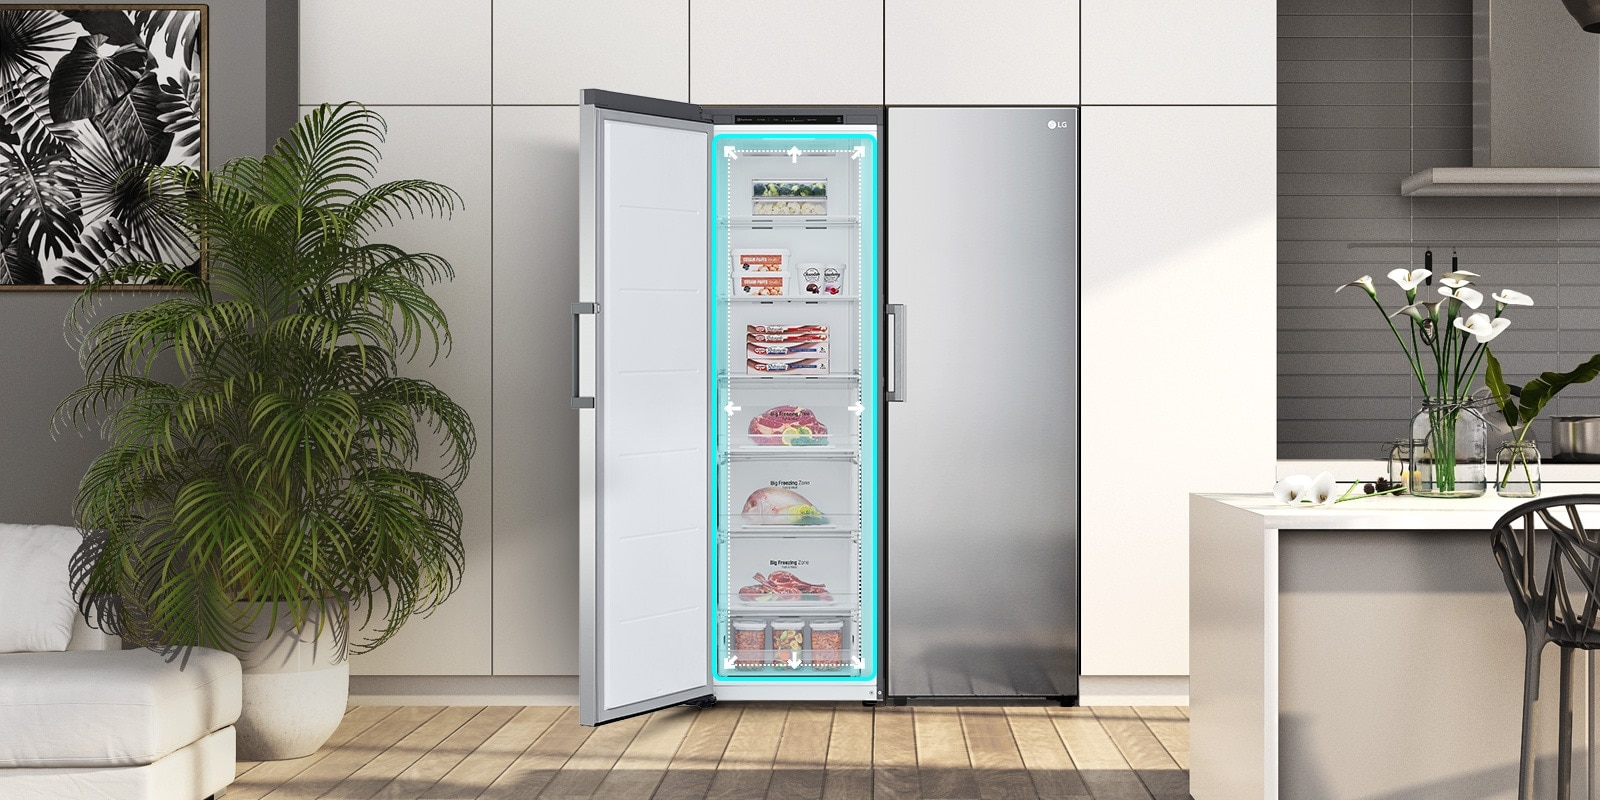 The freezer is shown from the front with the door open and a blue square and arrows pushing out highlighting the ample space inside.